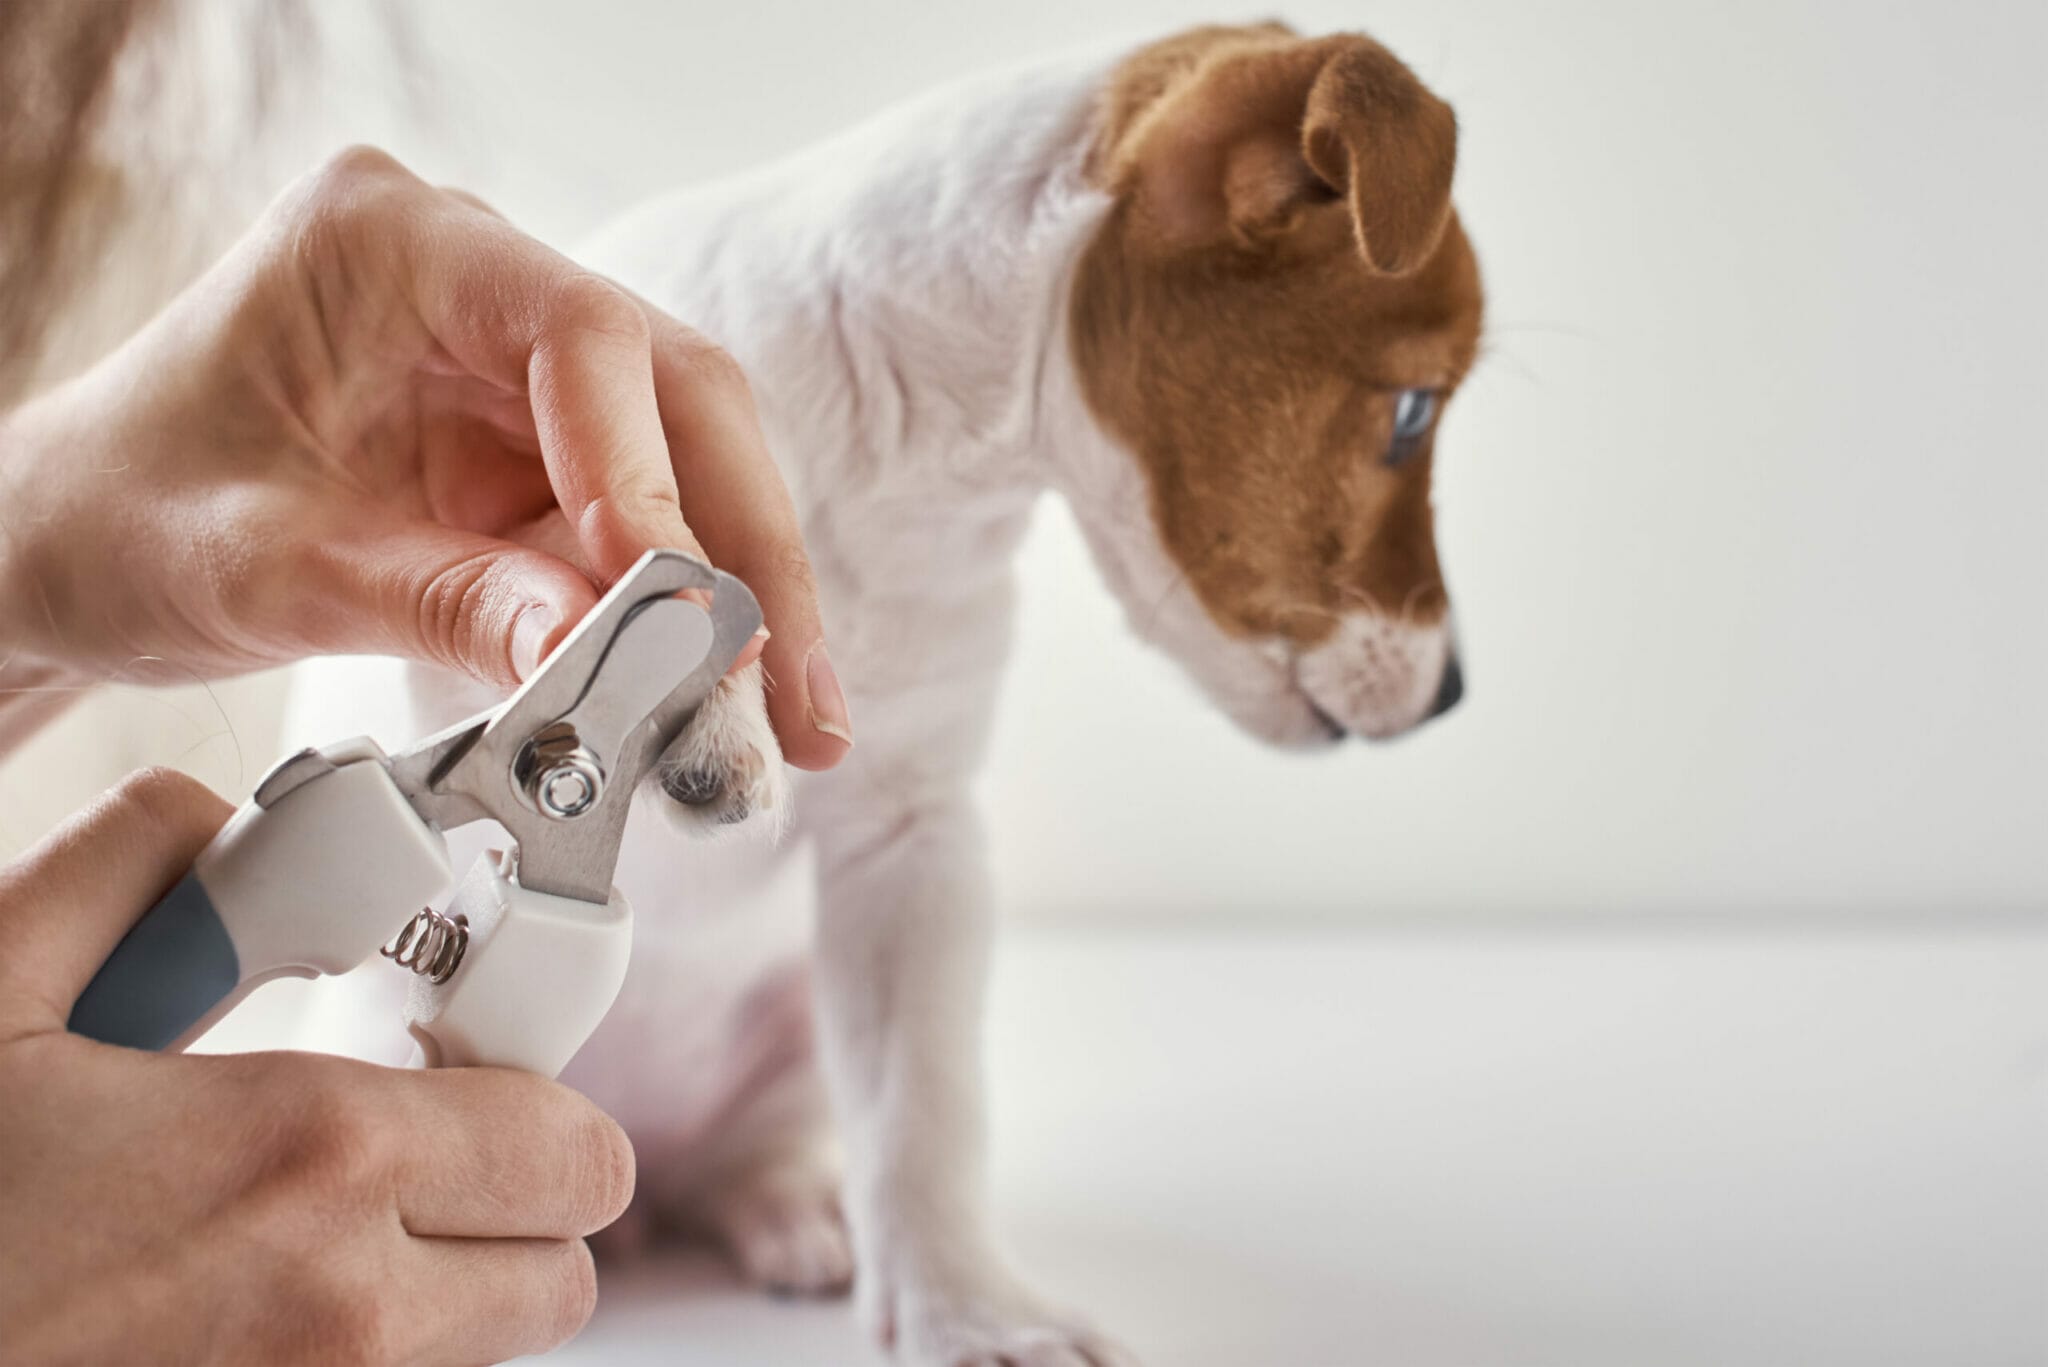 If your dog has had bad experiences with nail trimming in the past, it's likely that he associates the experience with something negative. Perhaps he was restrained too tightly, or the clippers were too sharp and hurt him. The solution: If your dog has had bad experiences with nail trimming in the past, try to make the experience more positive for him. Use a restraint that is comfortable for him, and make sure to reward your dog with a lot of treats. This way you condition your dog's emotions for a better experience.